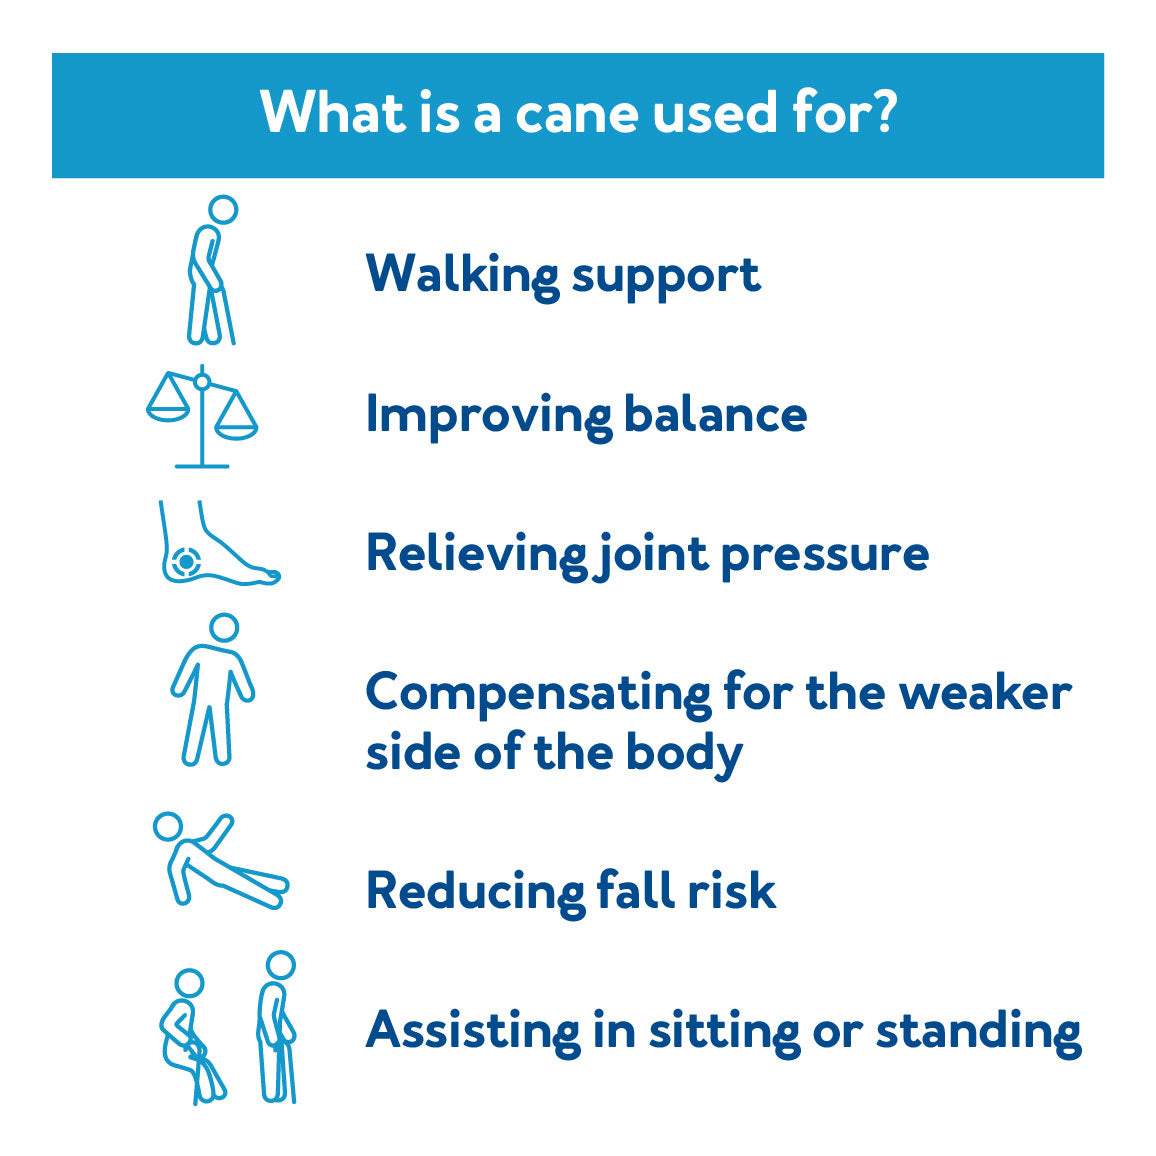 What is a Cane Used for? Walking support, improving balance : Further details are provided next to image